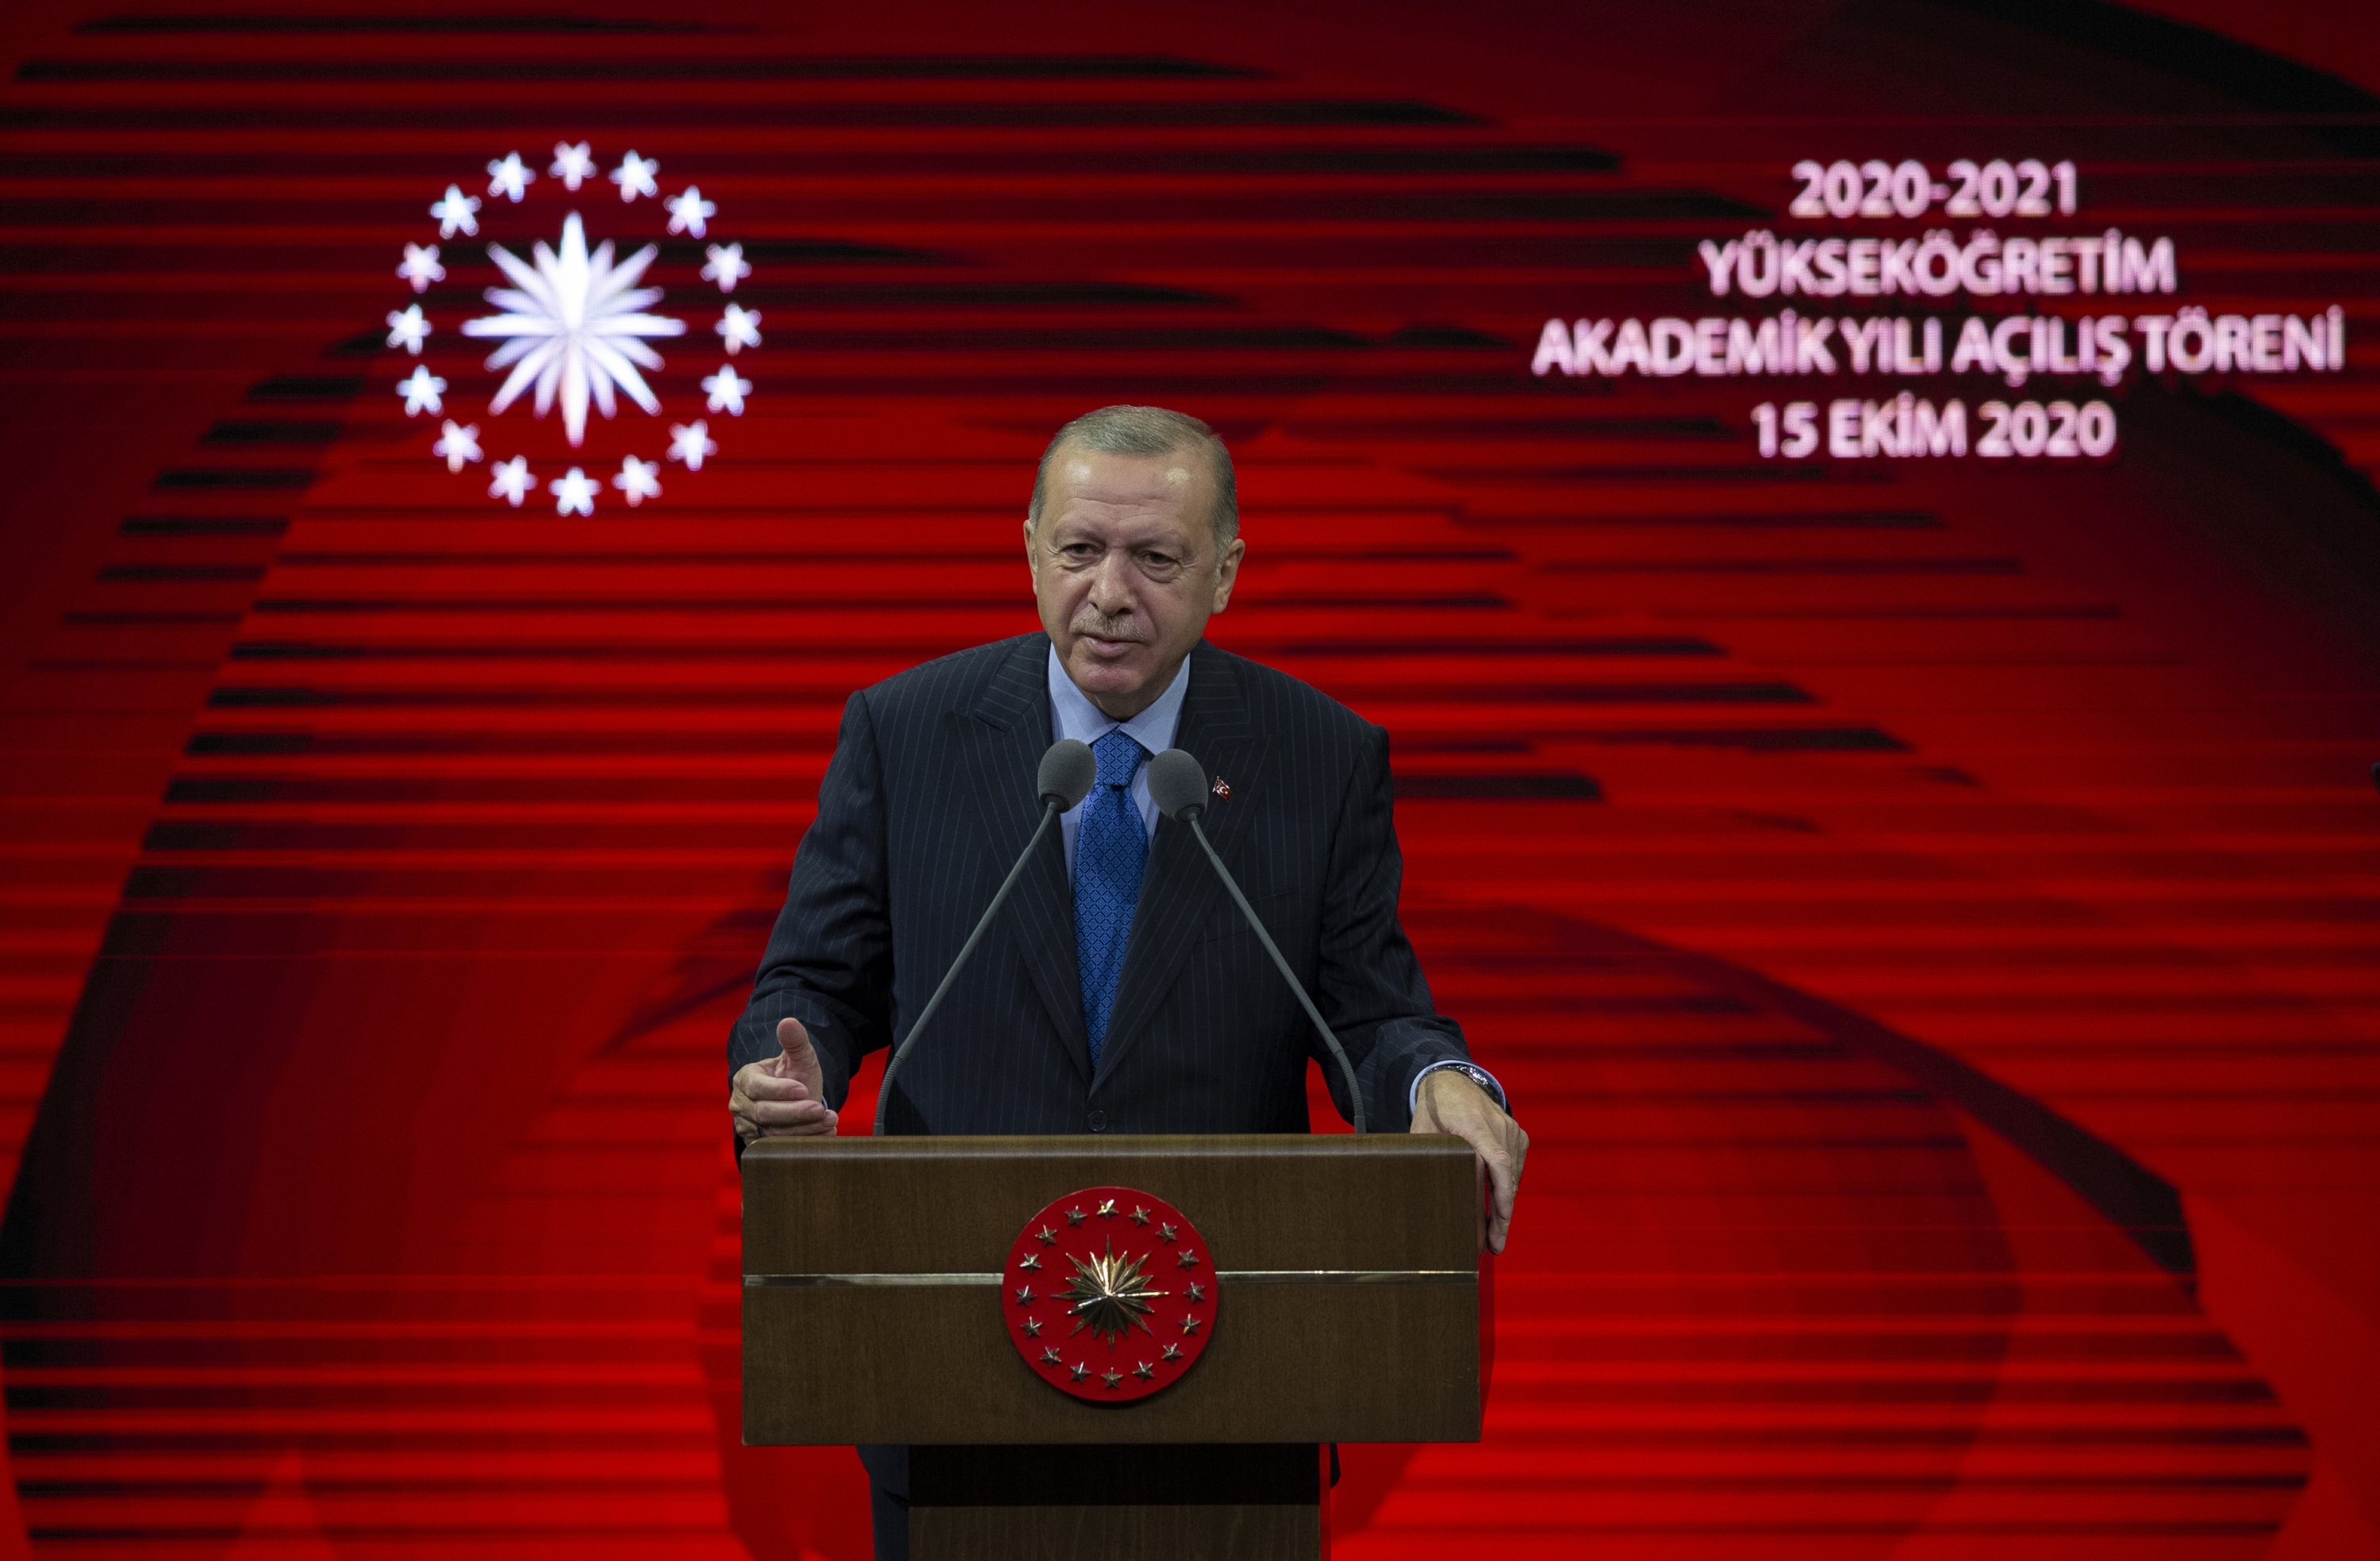 Next elections to be held in June 2023, Erdoğan says | Daily Sabah